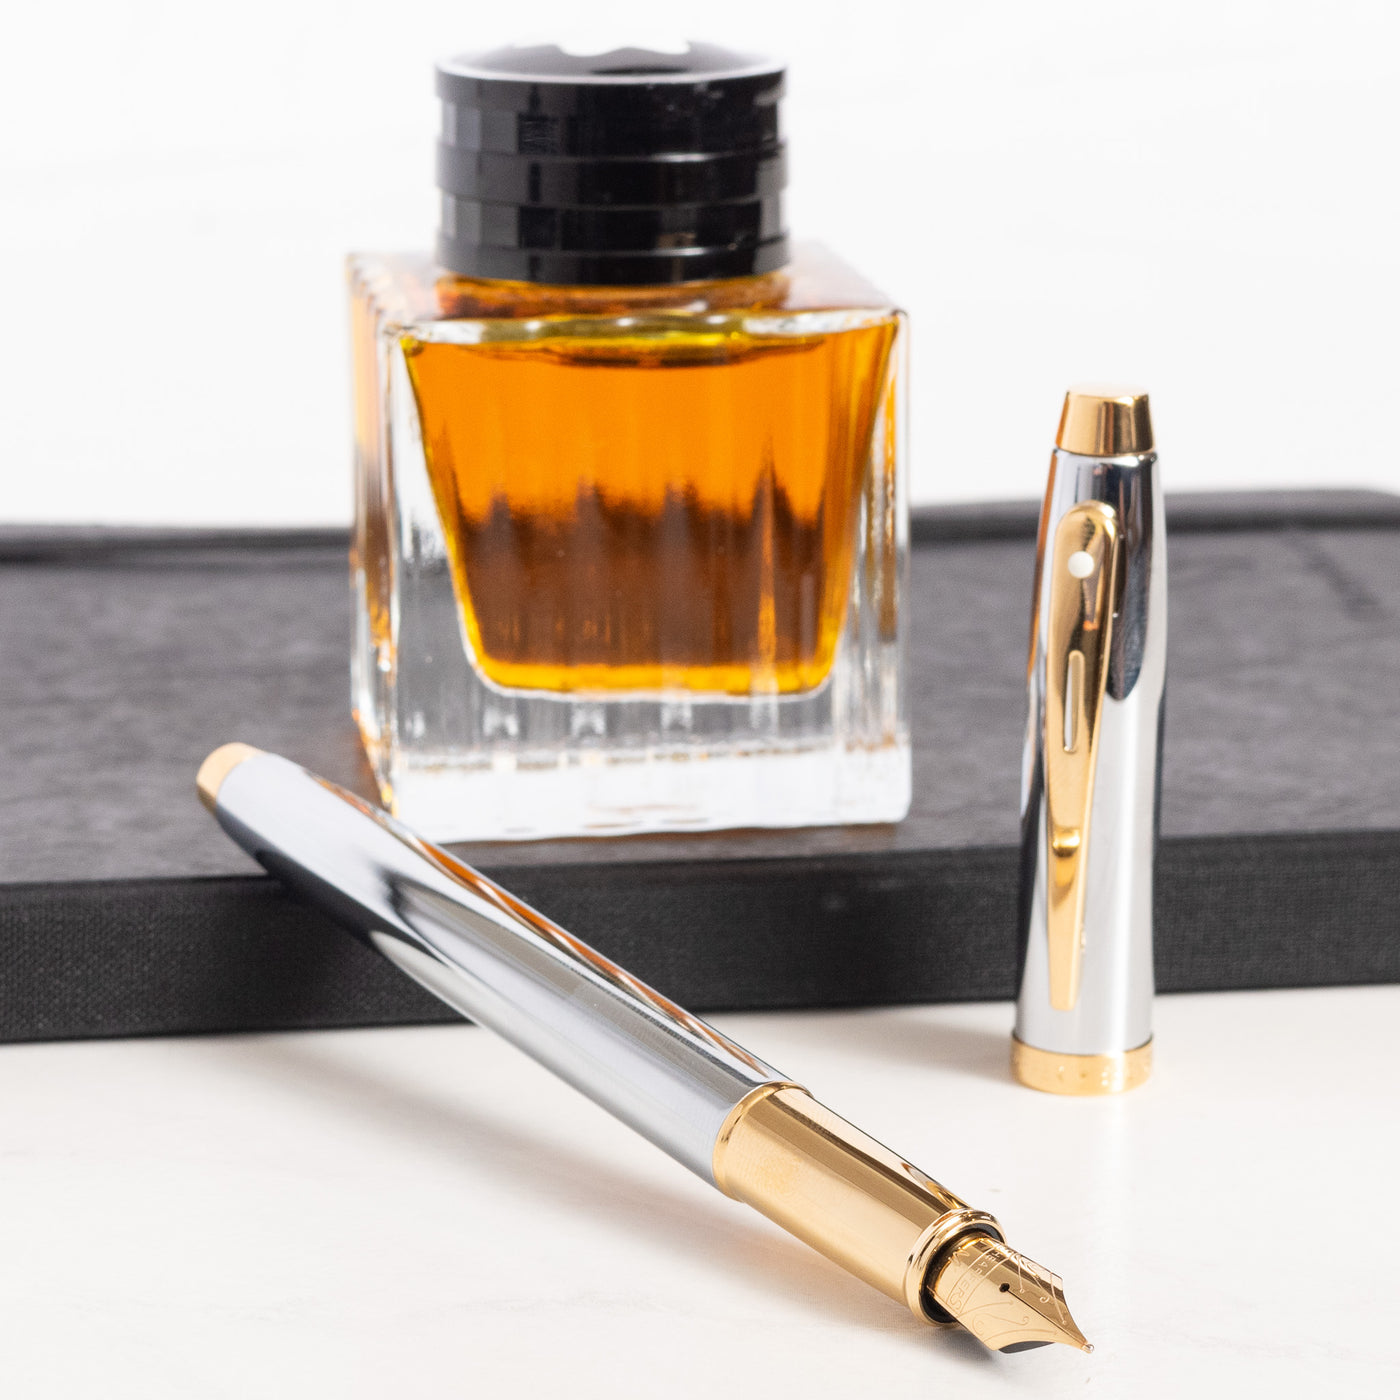 Sheaffer 100 Fountain Pen - Chrome with Gold Trim uncapped